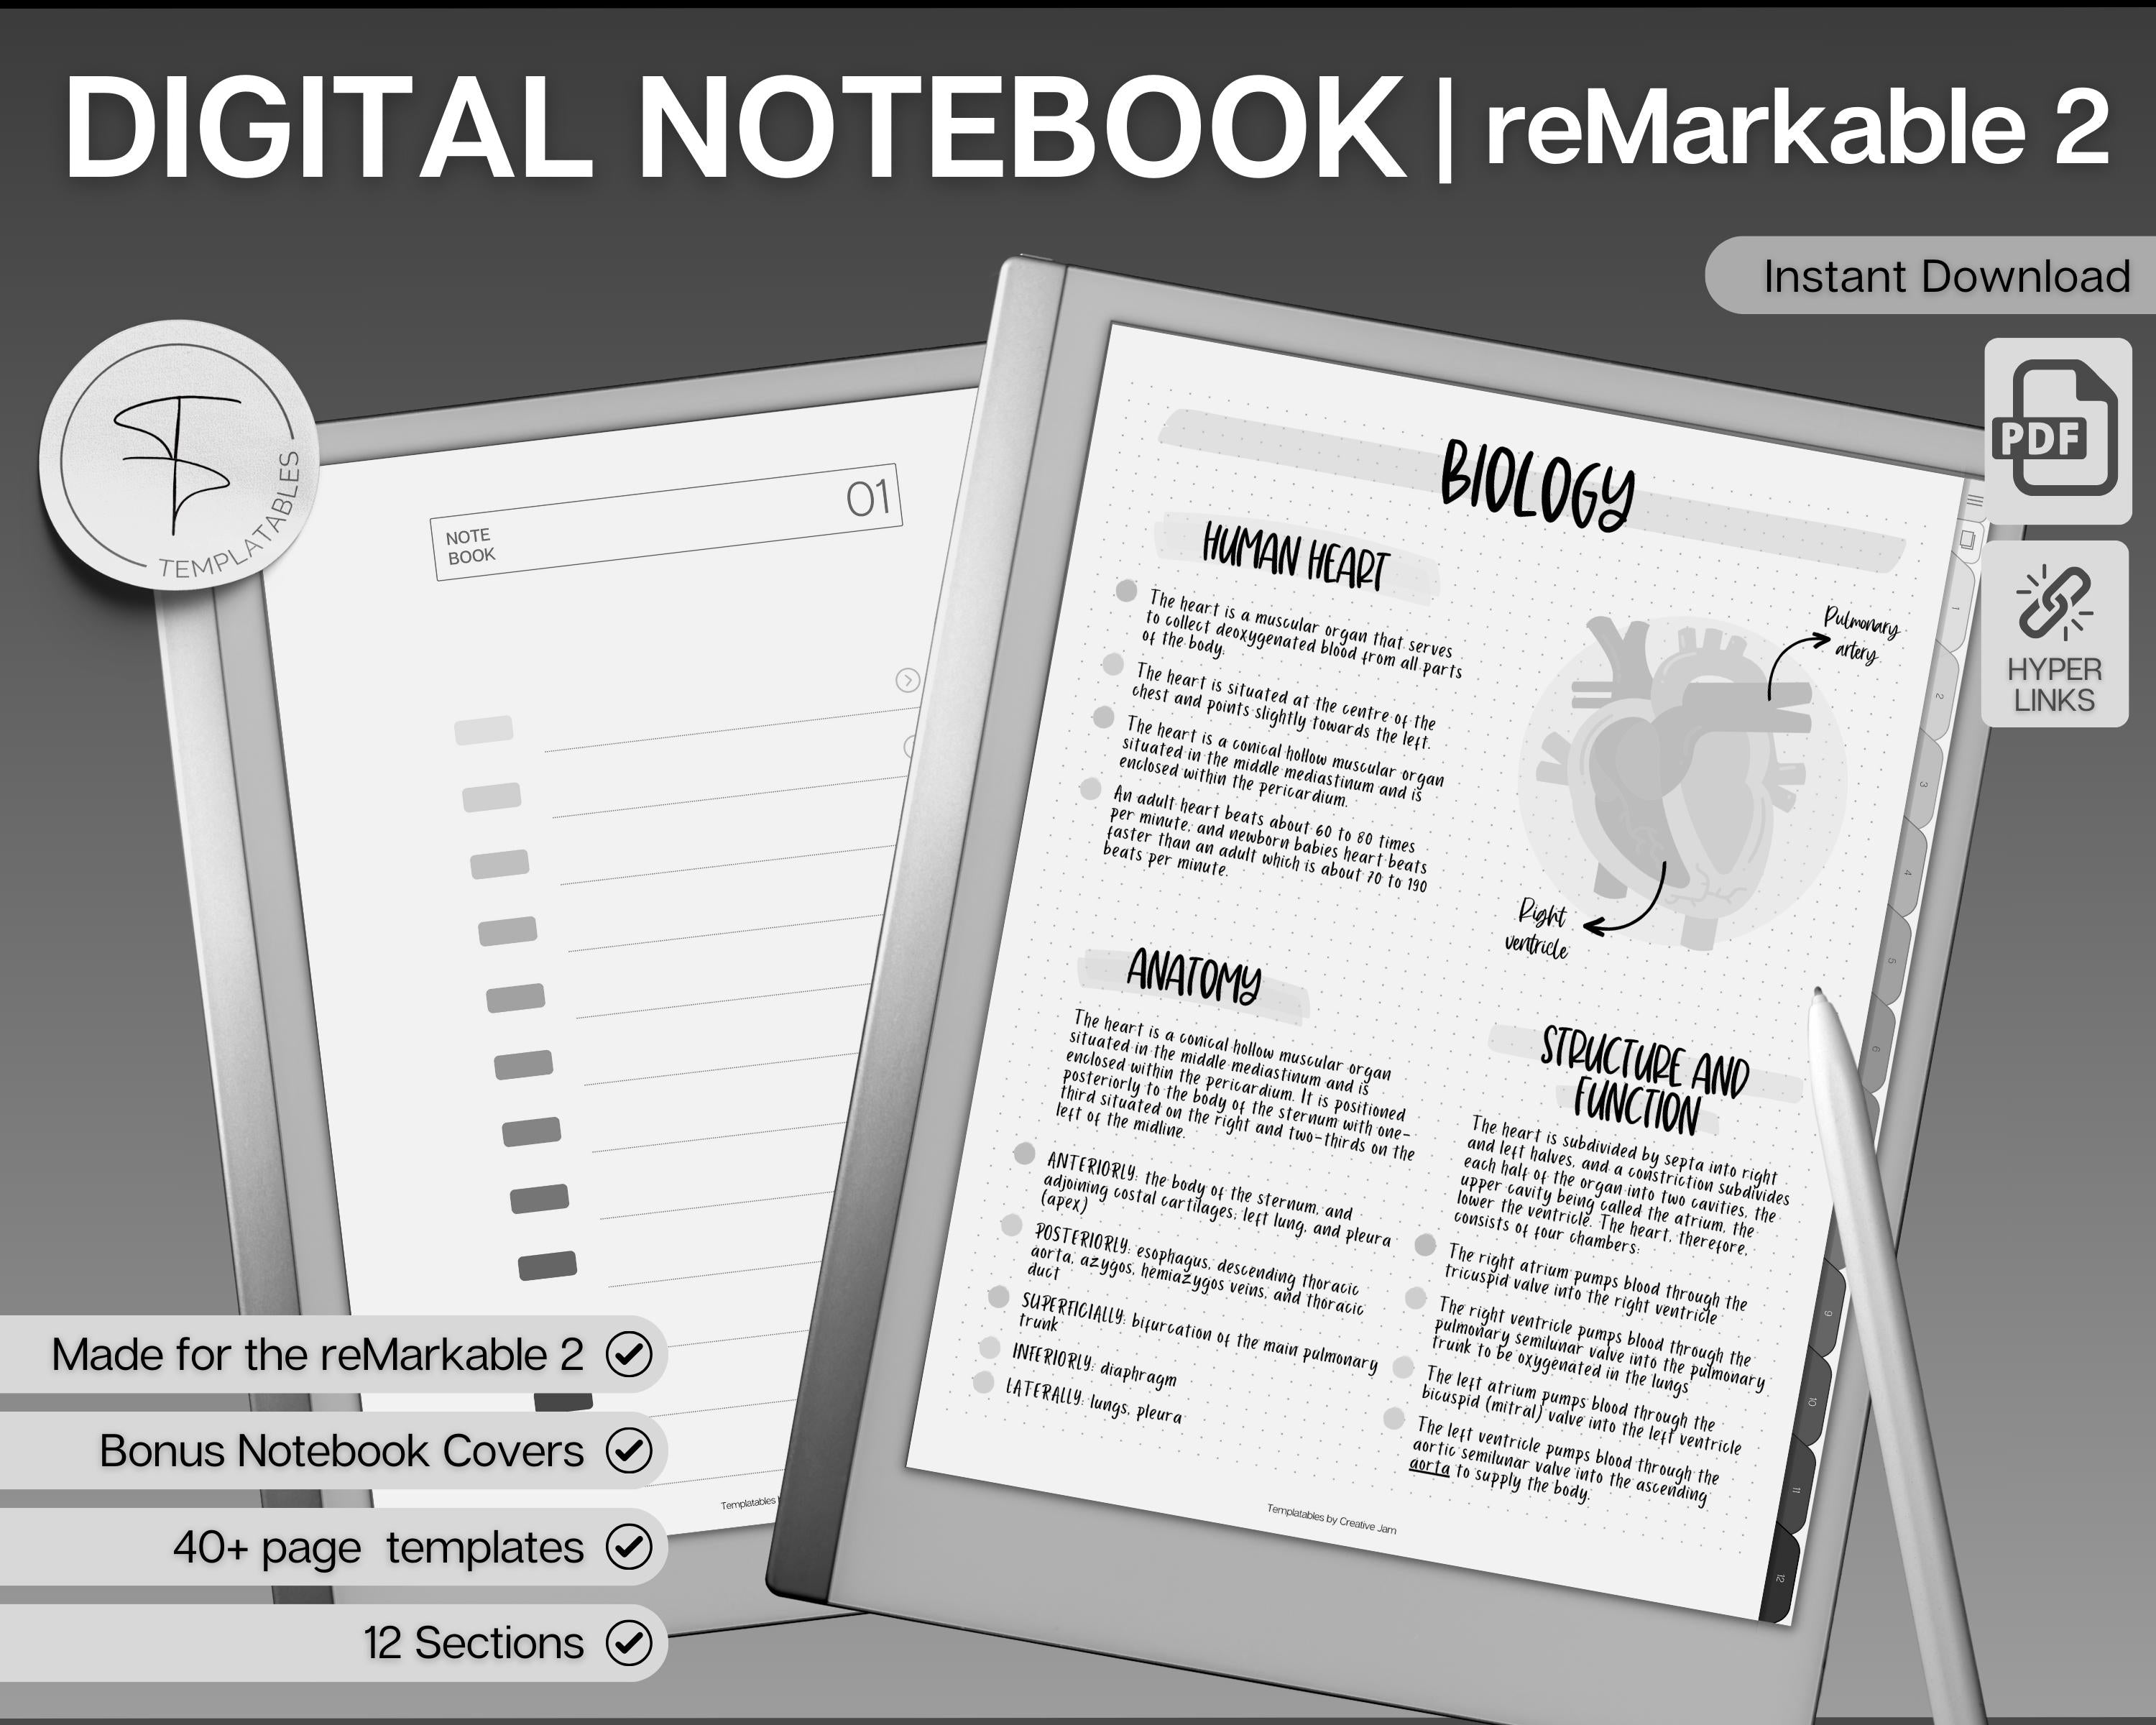 ReMarkable 2 Review: This Digital Notebook Is Remarkably Cool